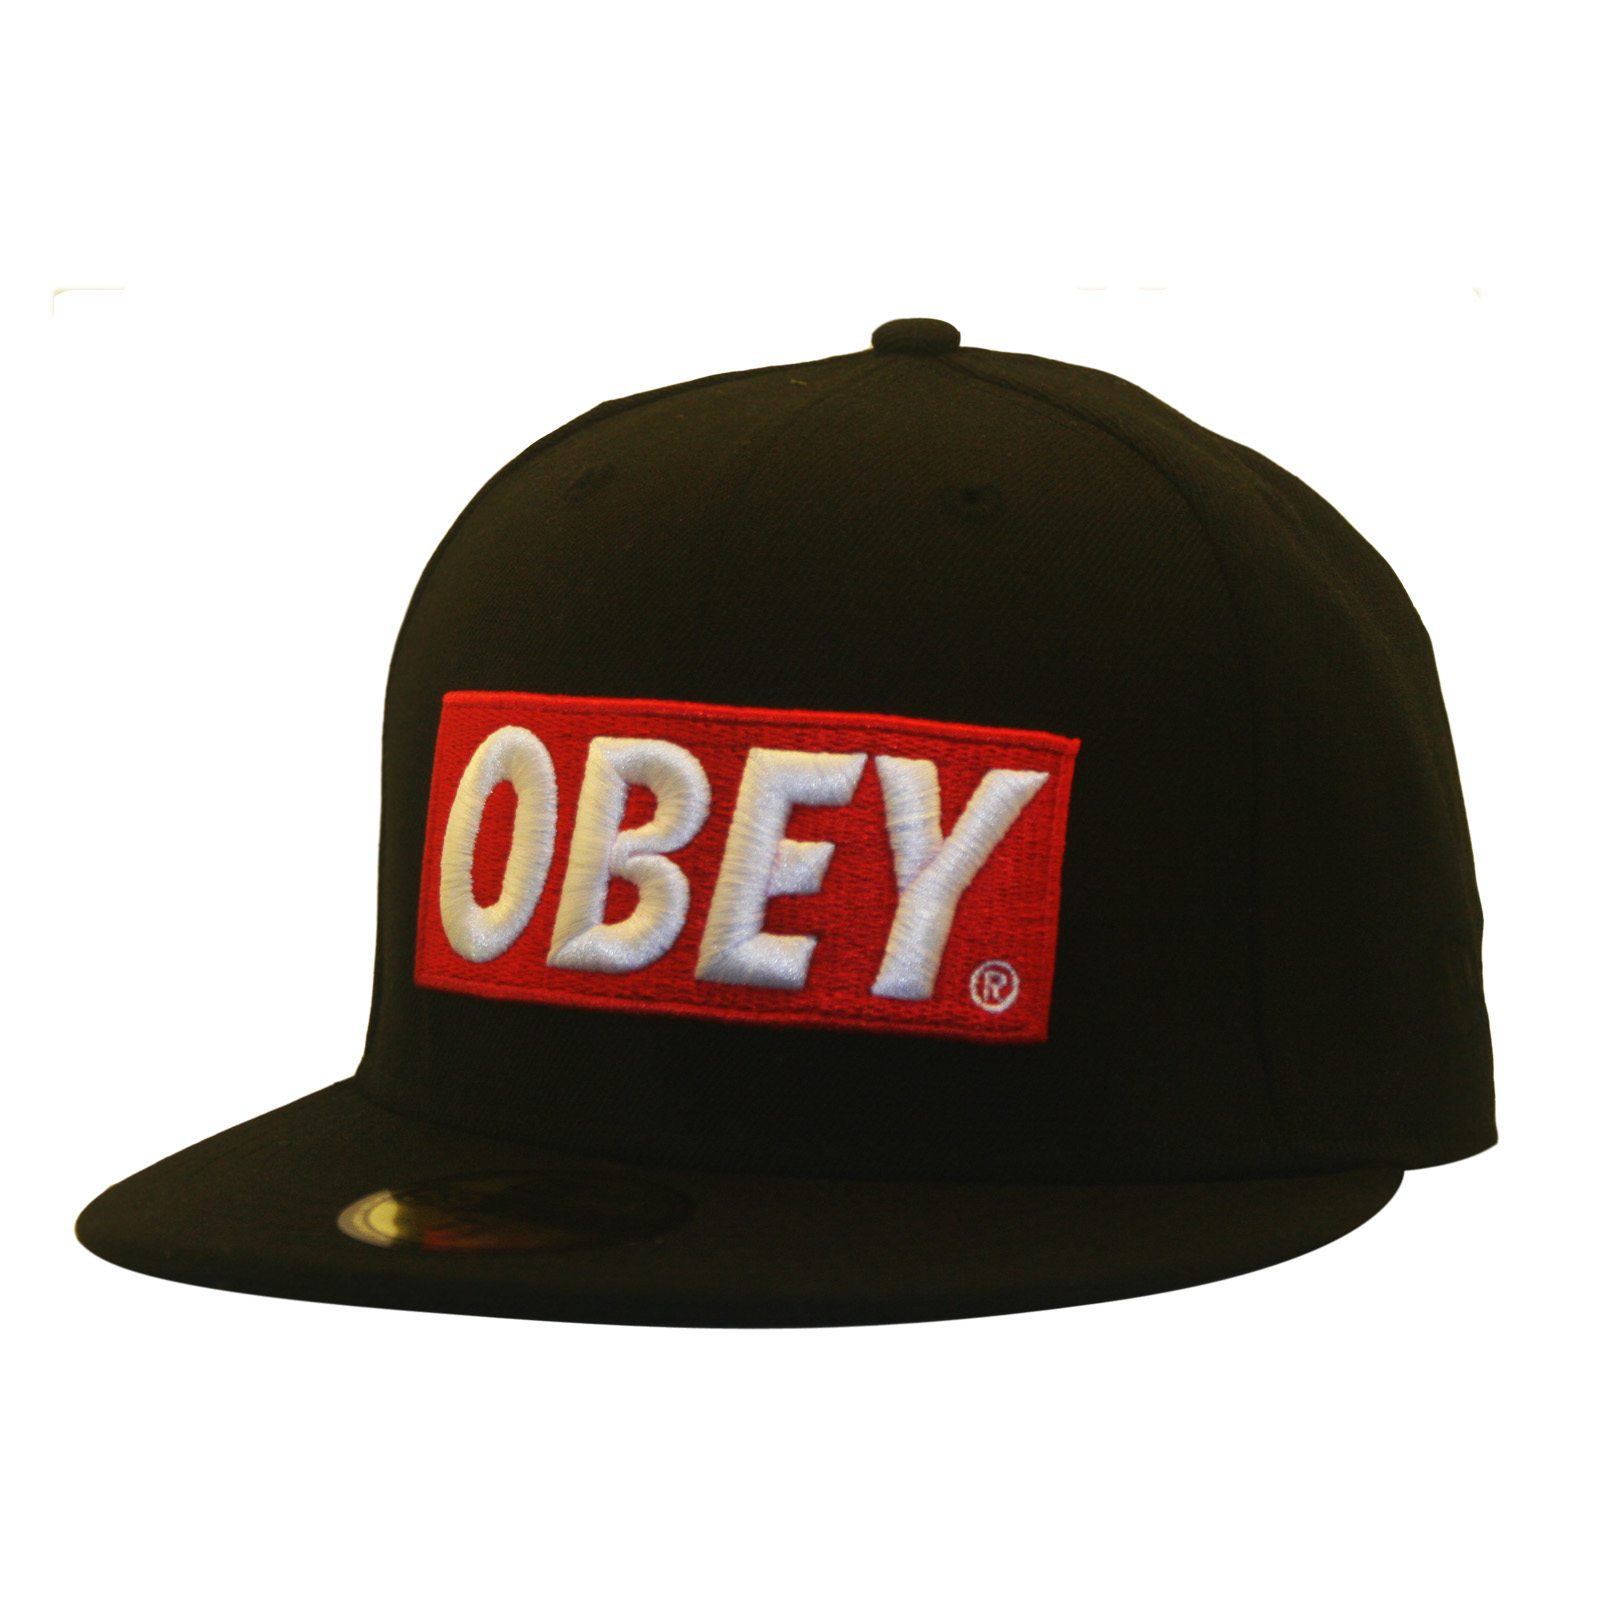 CROSSOVER: OBEY SPRING 2011 @ CROSSOVER